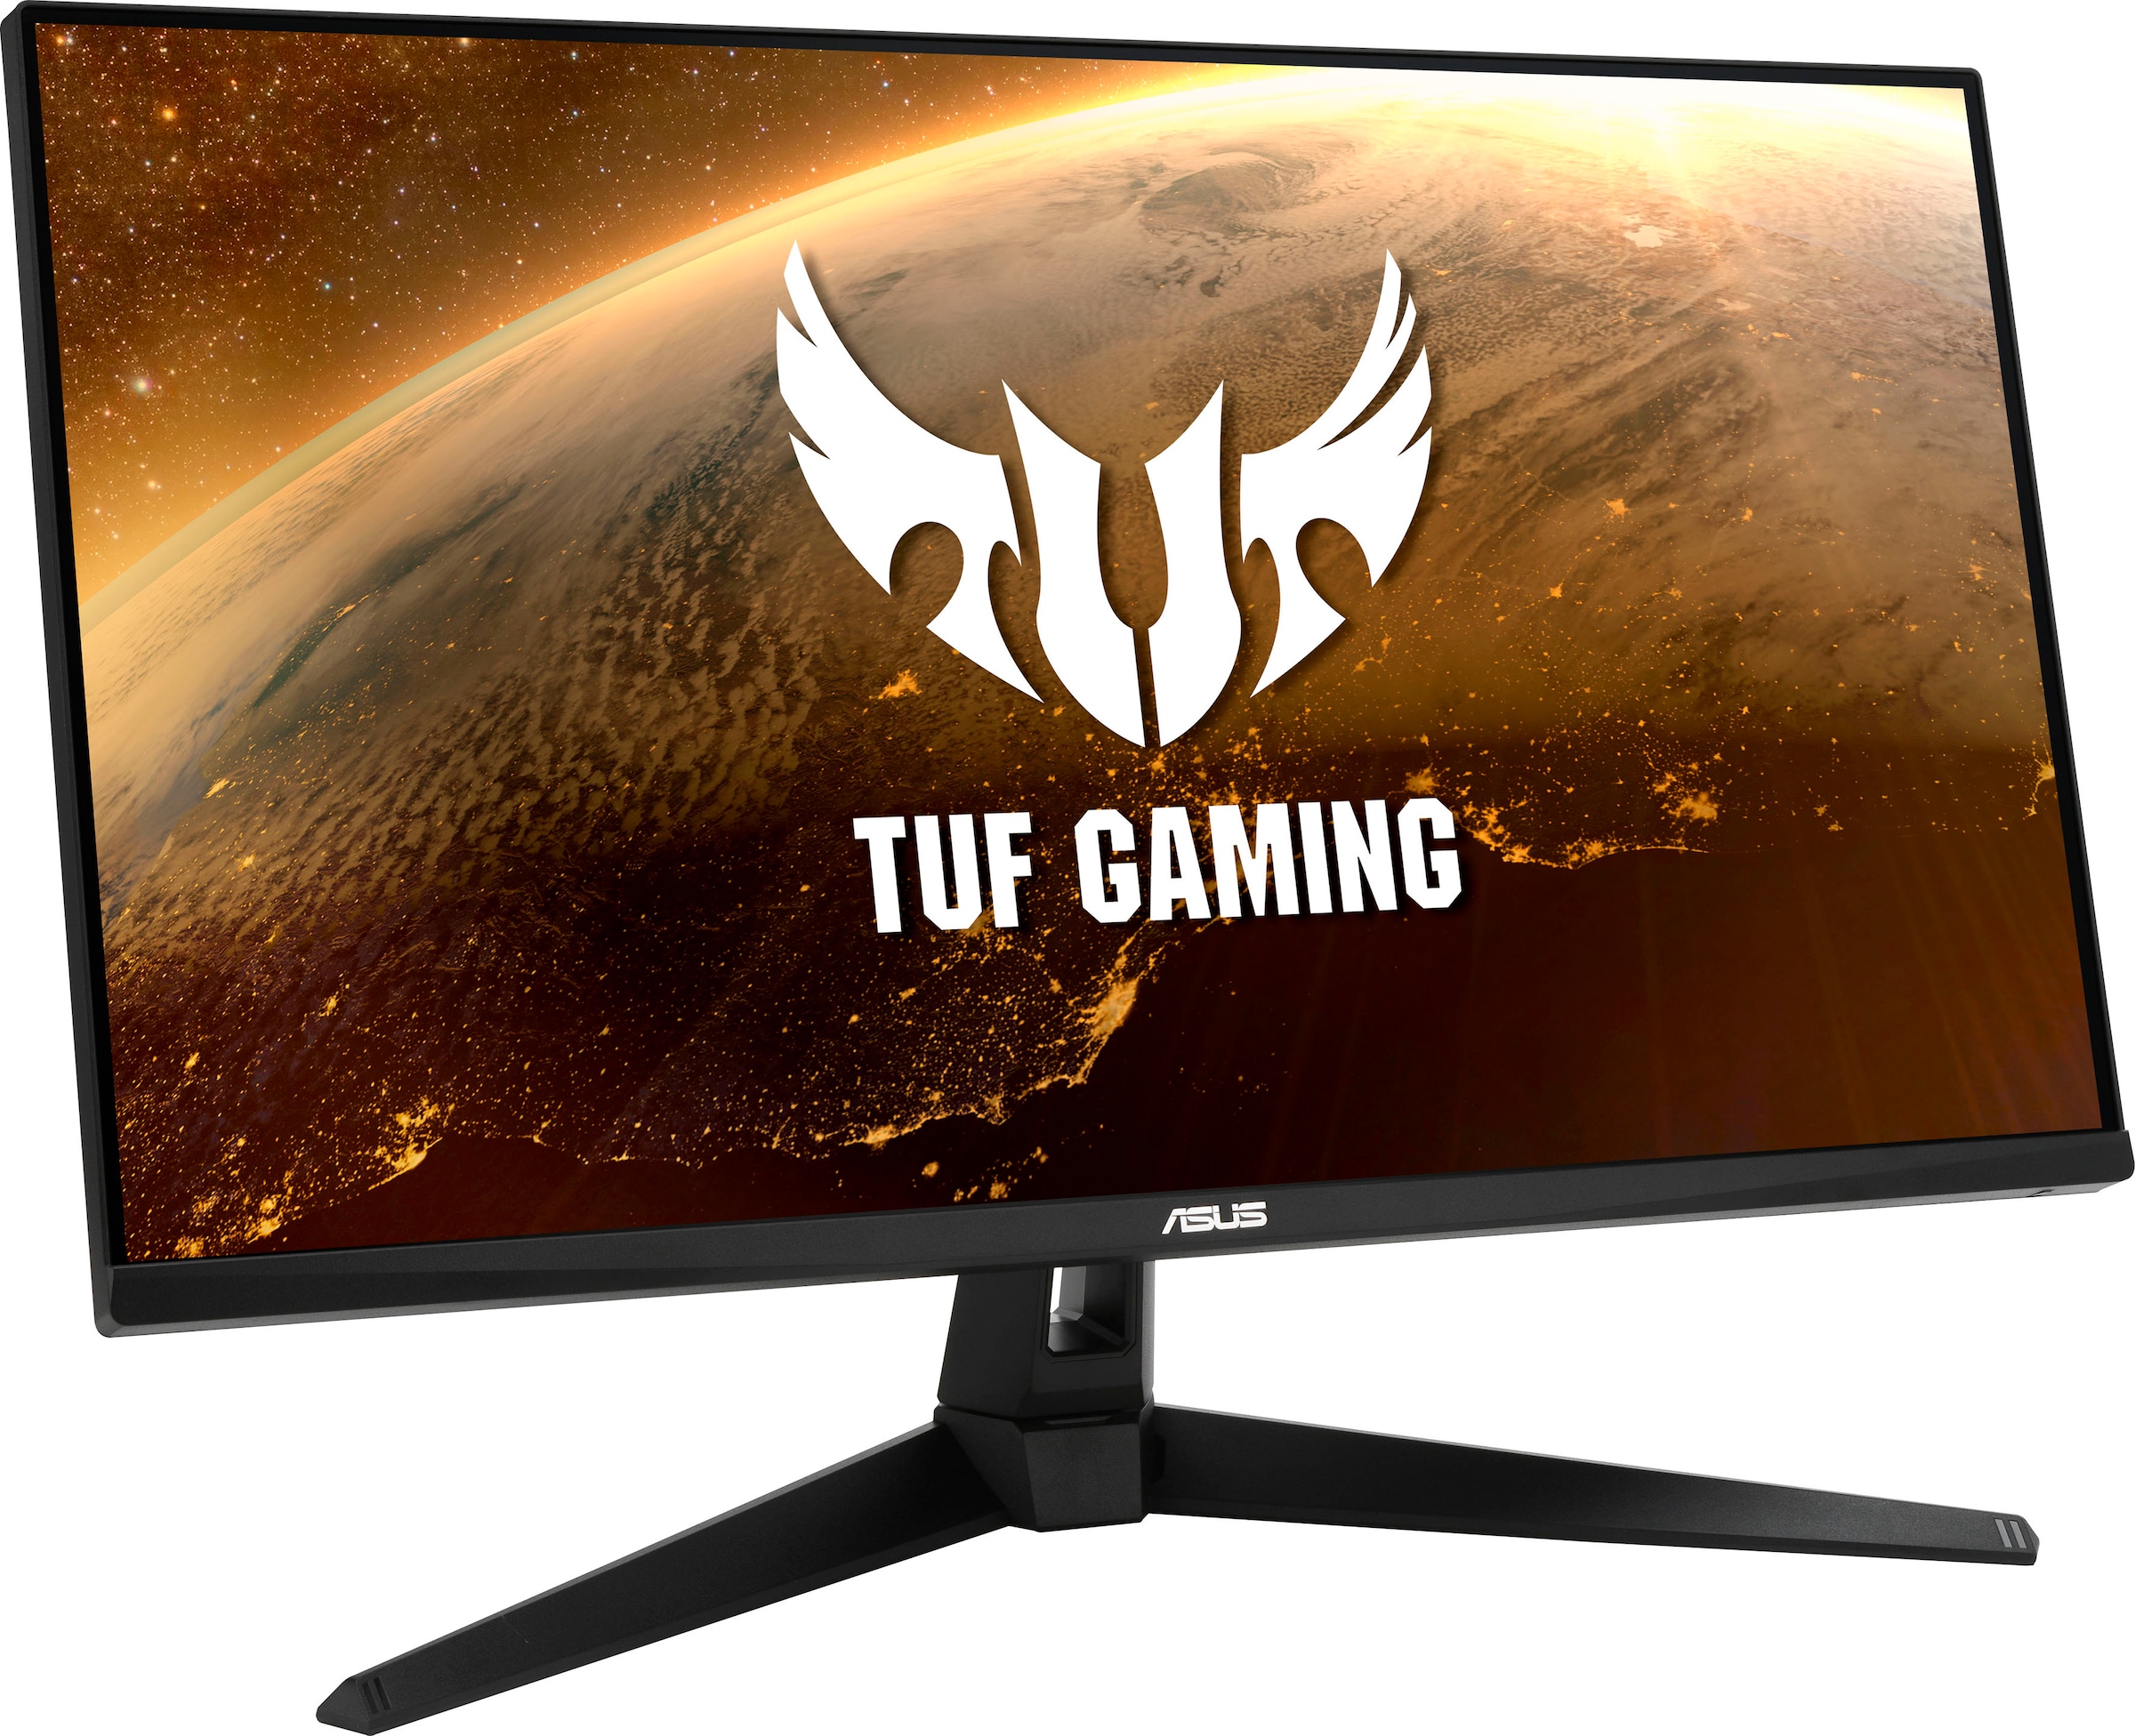 Asus Gaming-Monitor »TUF Gaming VG289Q1A«, 71 cm/28 Zoll, 3840 x 2160 px, 4K Ultra HD, 5 ms Reaktionszeit, 60 Hz